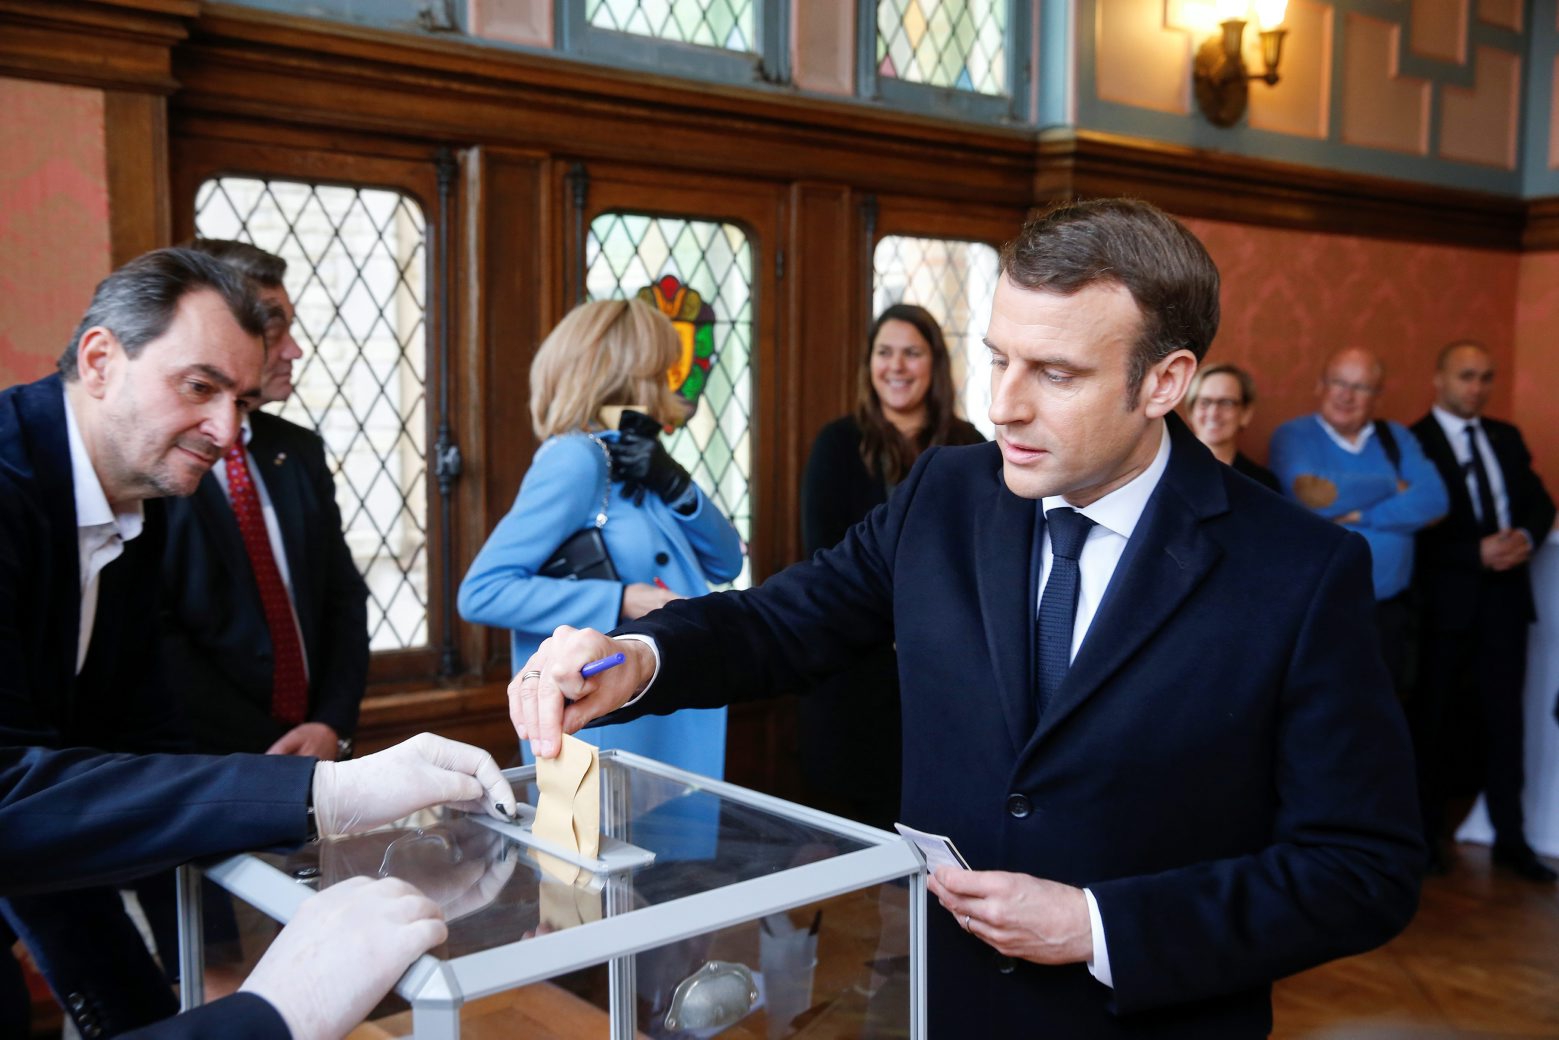 epa08295519 French President Emmanuel Macron (R) casts his ballot during the first round of the French Municipal elections in Paris, France, 15 March 2020. France is holding nationwide elections to choose all of its mayors and other local leaders despite a crackdown on public gatherings because of the new Covid-19 coronavirus. Several European countries have closed borders, schools as well as public facilities, and have cancelled most major sports and entertainment events in order to prevent the spread of the SARS-CoV-2 coronavirus causing the Covid-19 disease.  EPA/PASCAL ROSSIGNOL / POOL  MAXPPP OUT FRANCE MUNICIPAL ELECTIONS